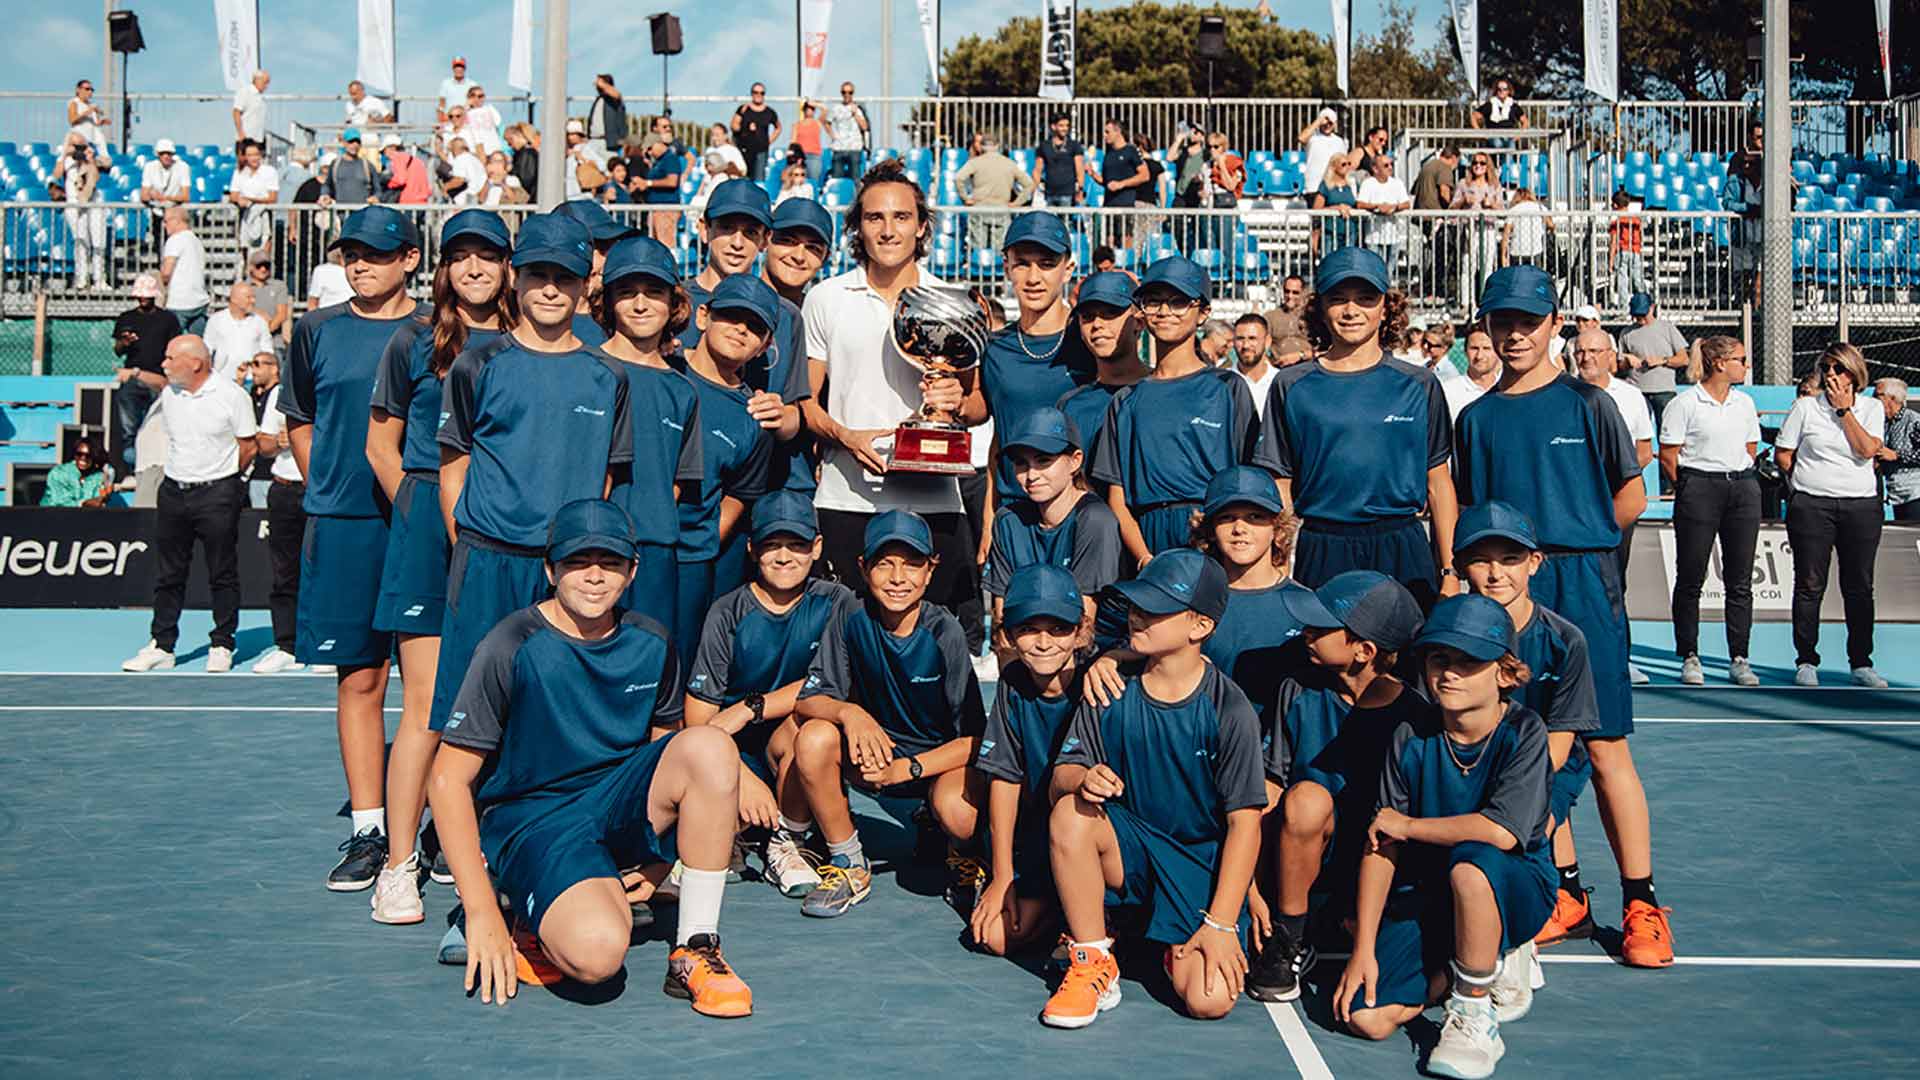 Mattia Bellucci poses with the ballkids at the 2022 Saint-Tropez Challenger.